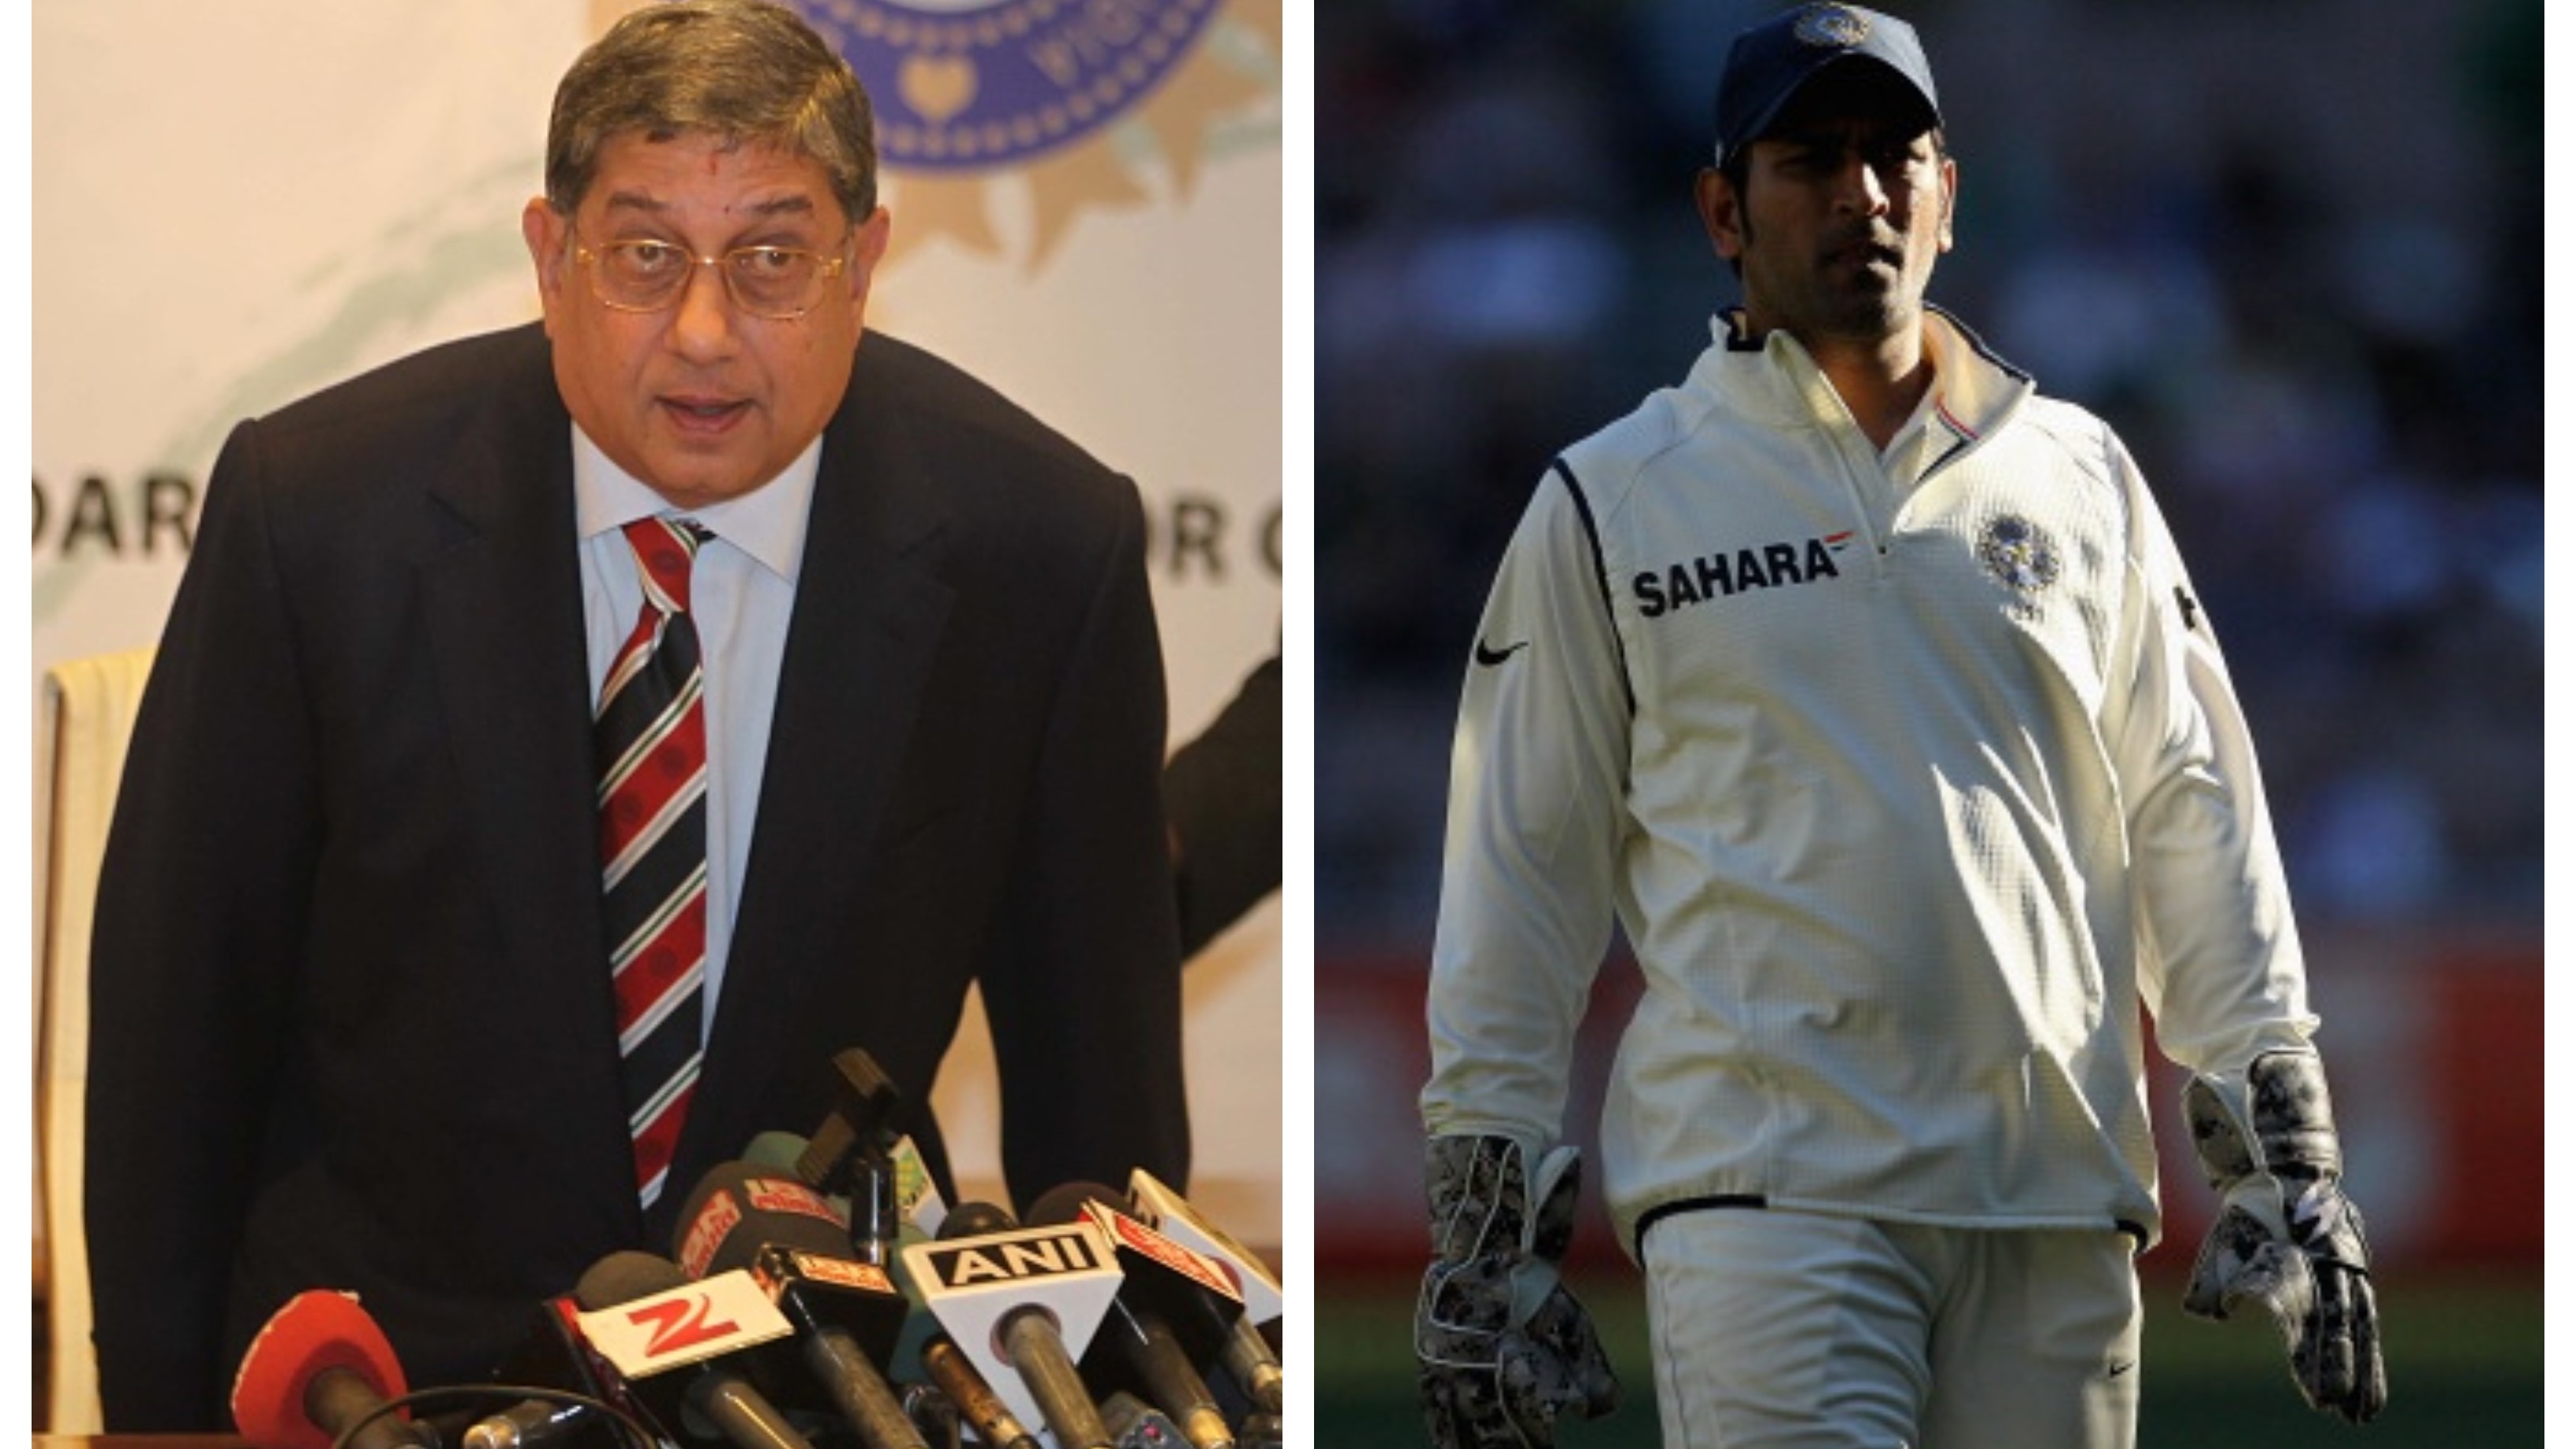 ‘Exercised all my authority to save Dhoni's captaincy in 2011’, admits ex-BCCI boss N Srinivasan